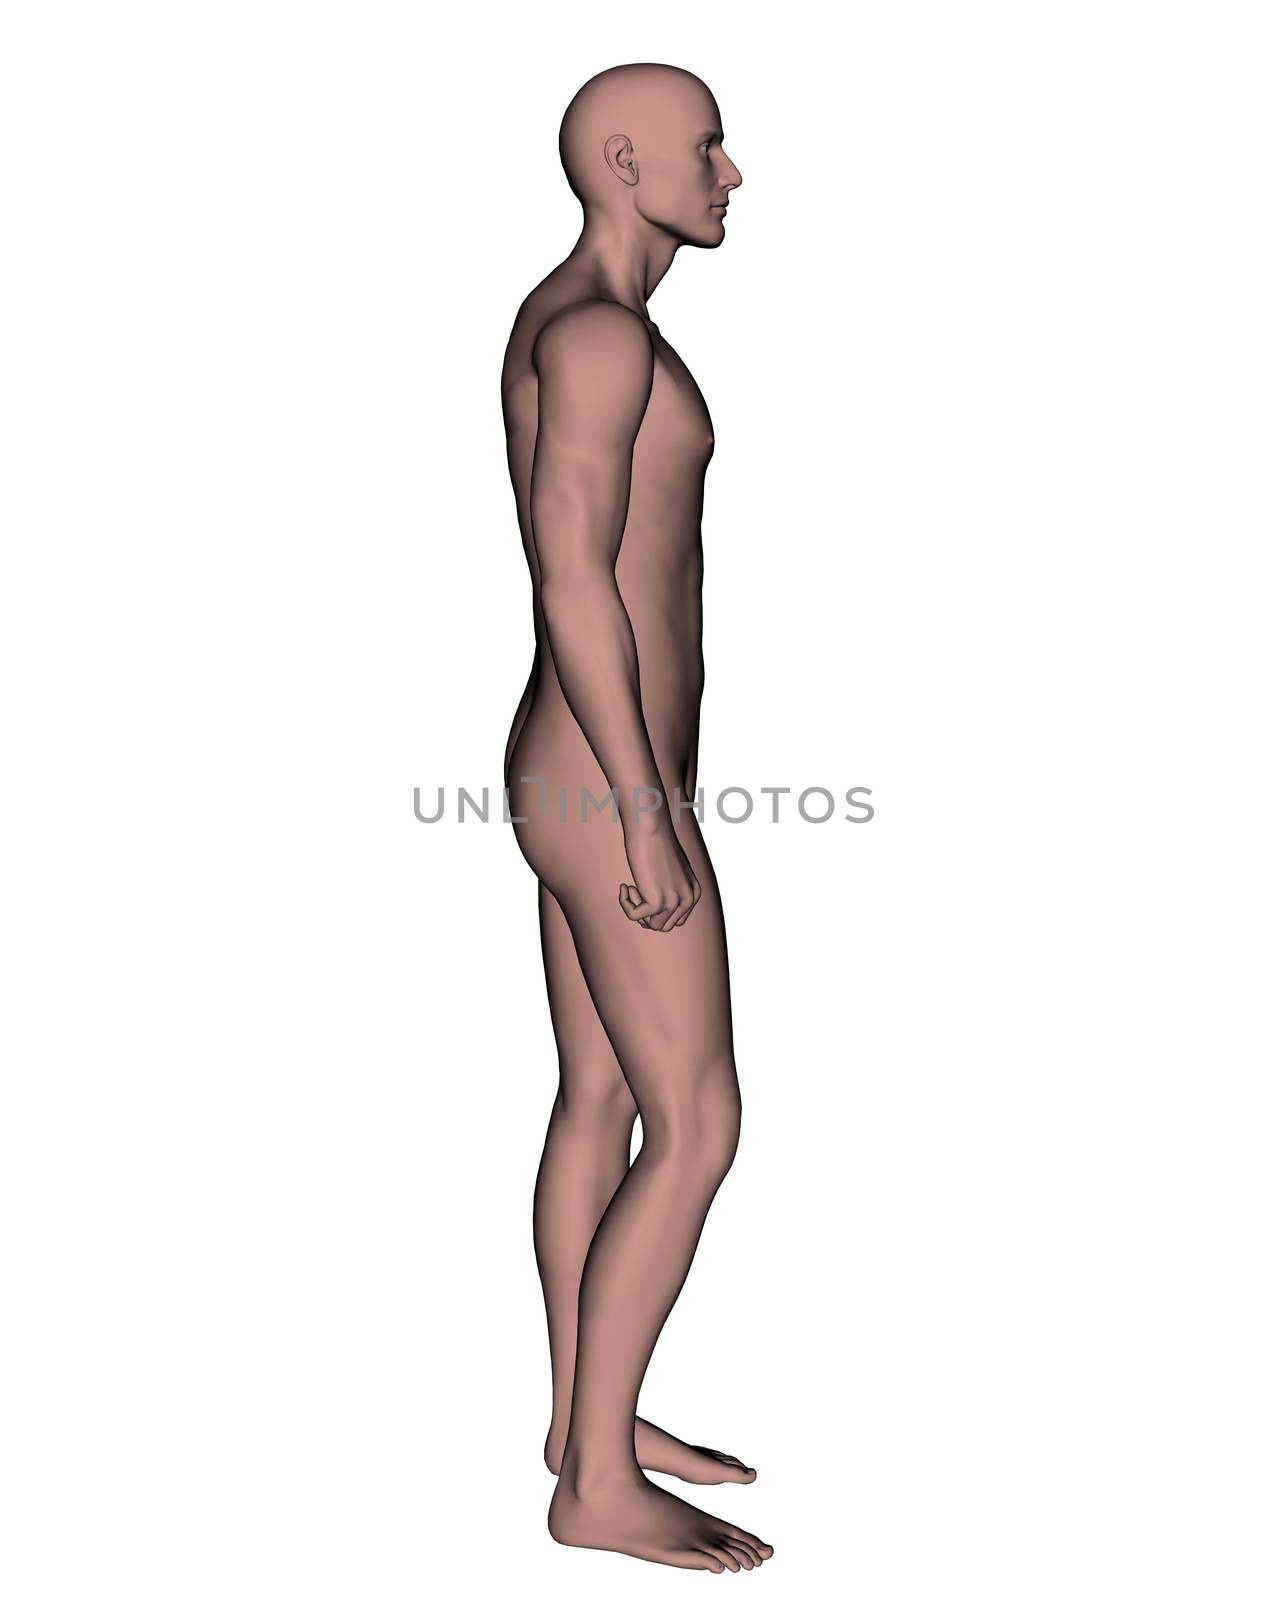 Side of a nude male in white background